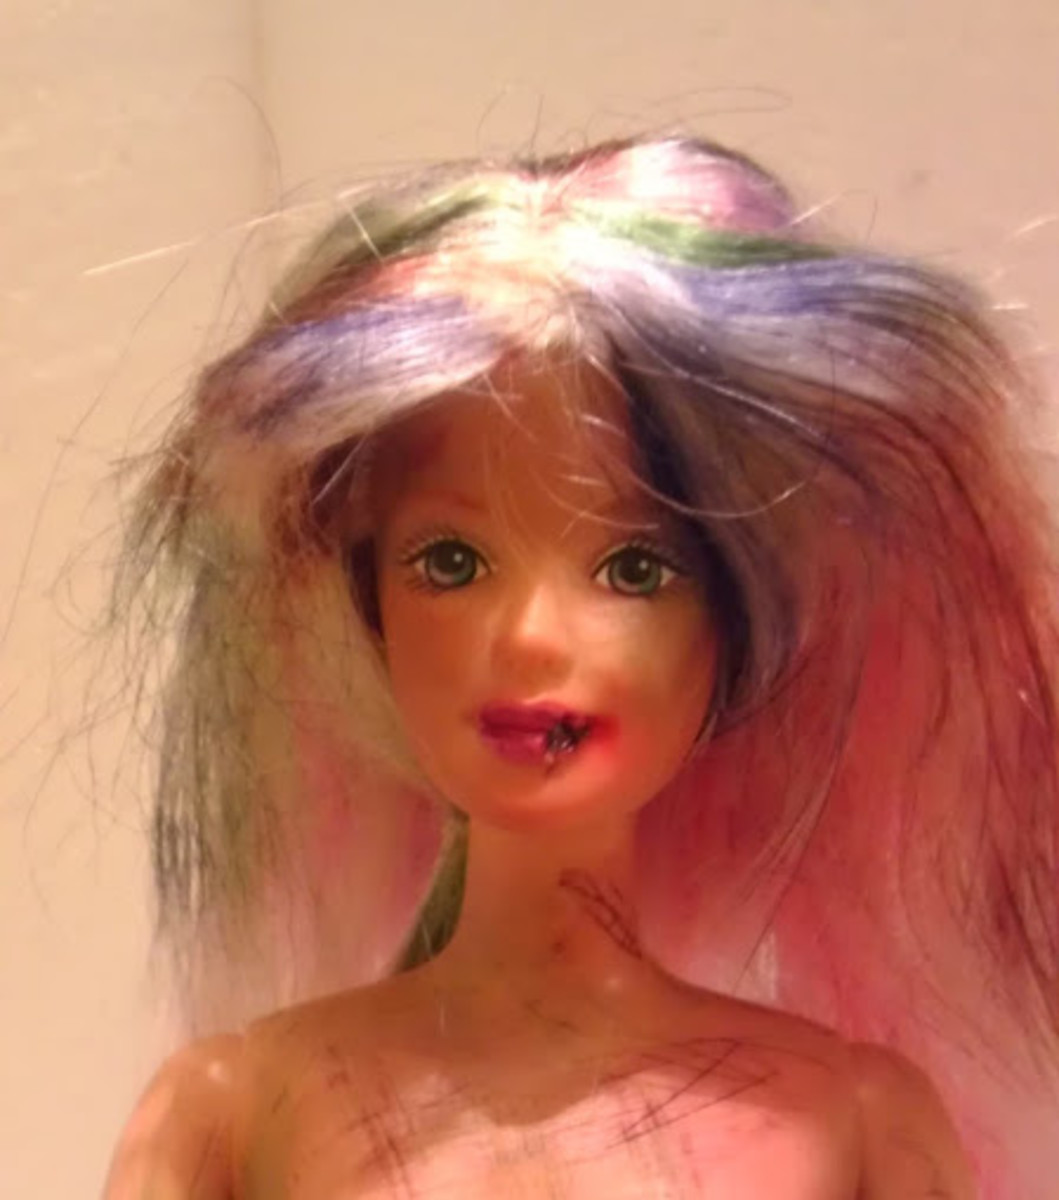 Uh oh! Barbie's lip must have gotten caught while she was chewing on something. And her new zombie 'do is perfect.